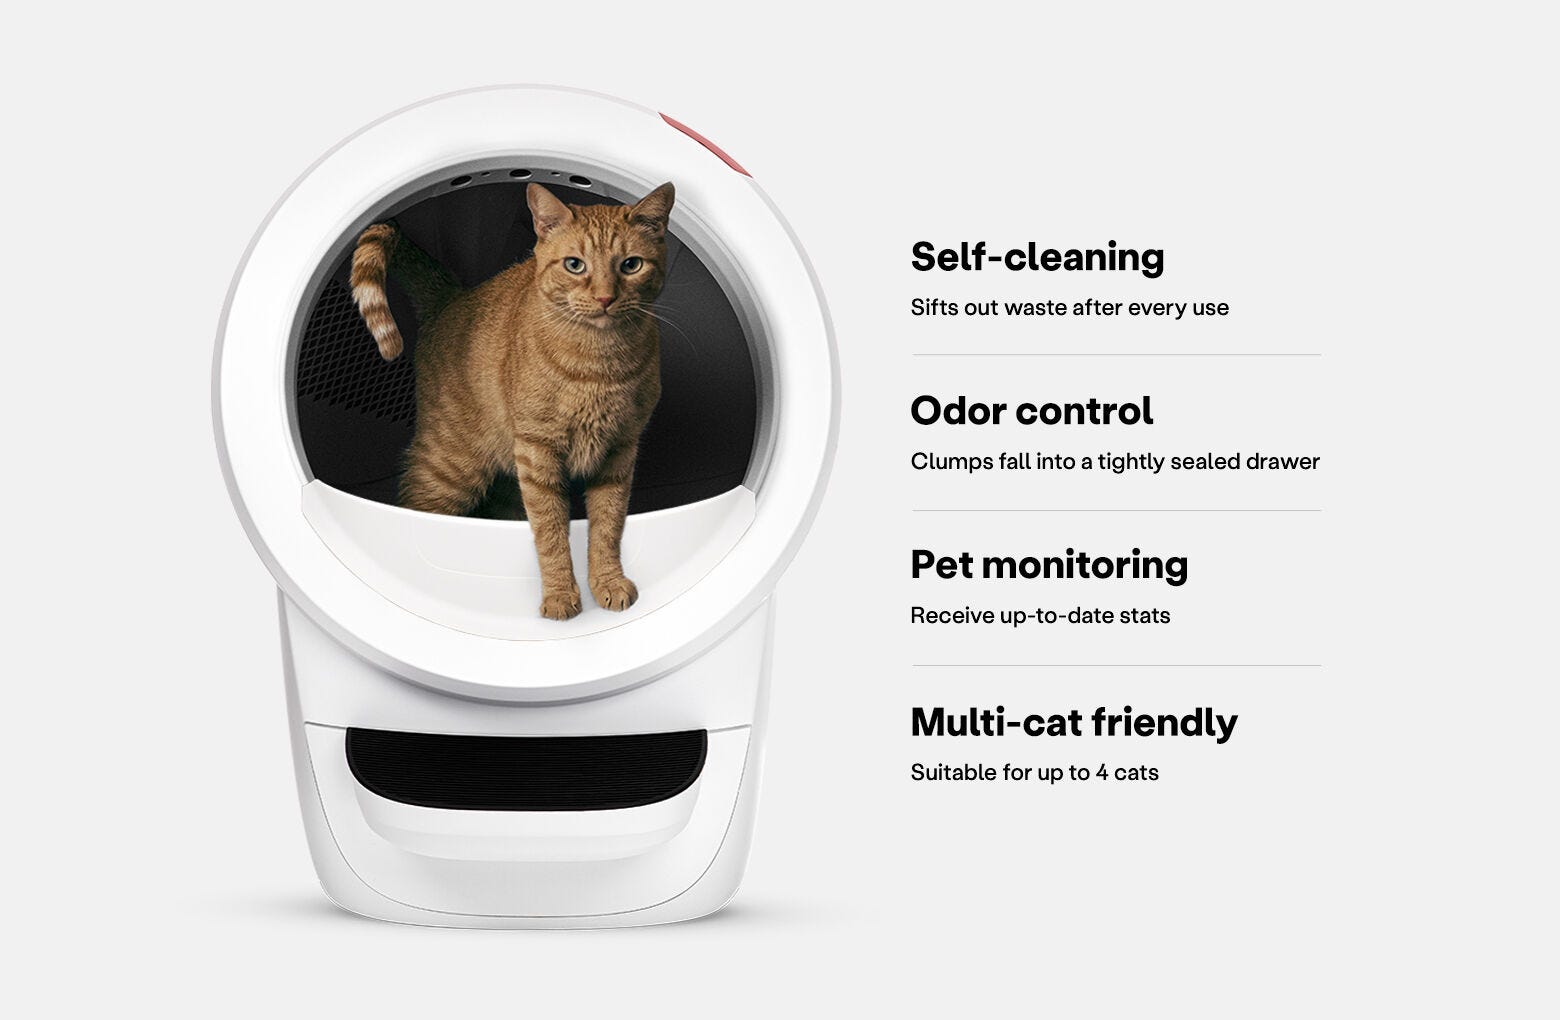 Buy the Smart Litter Box Monitor System